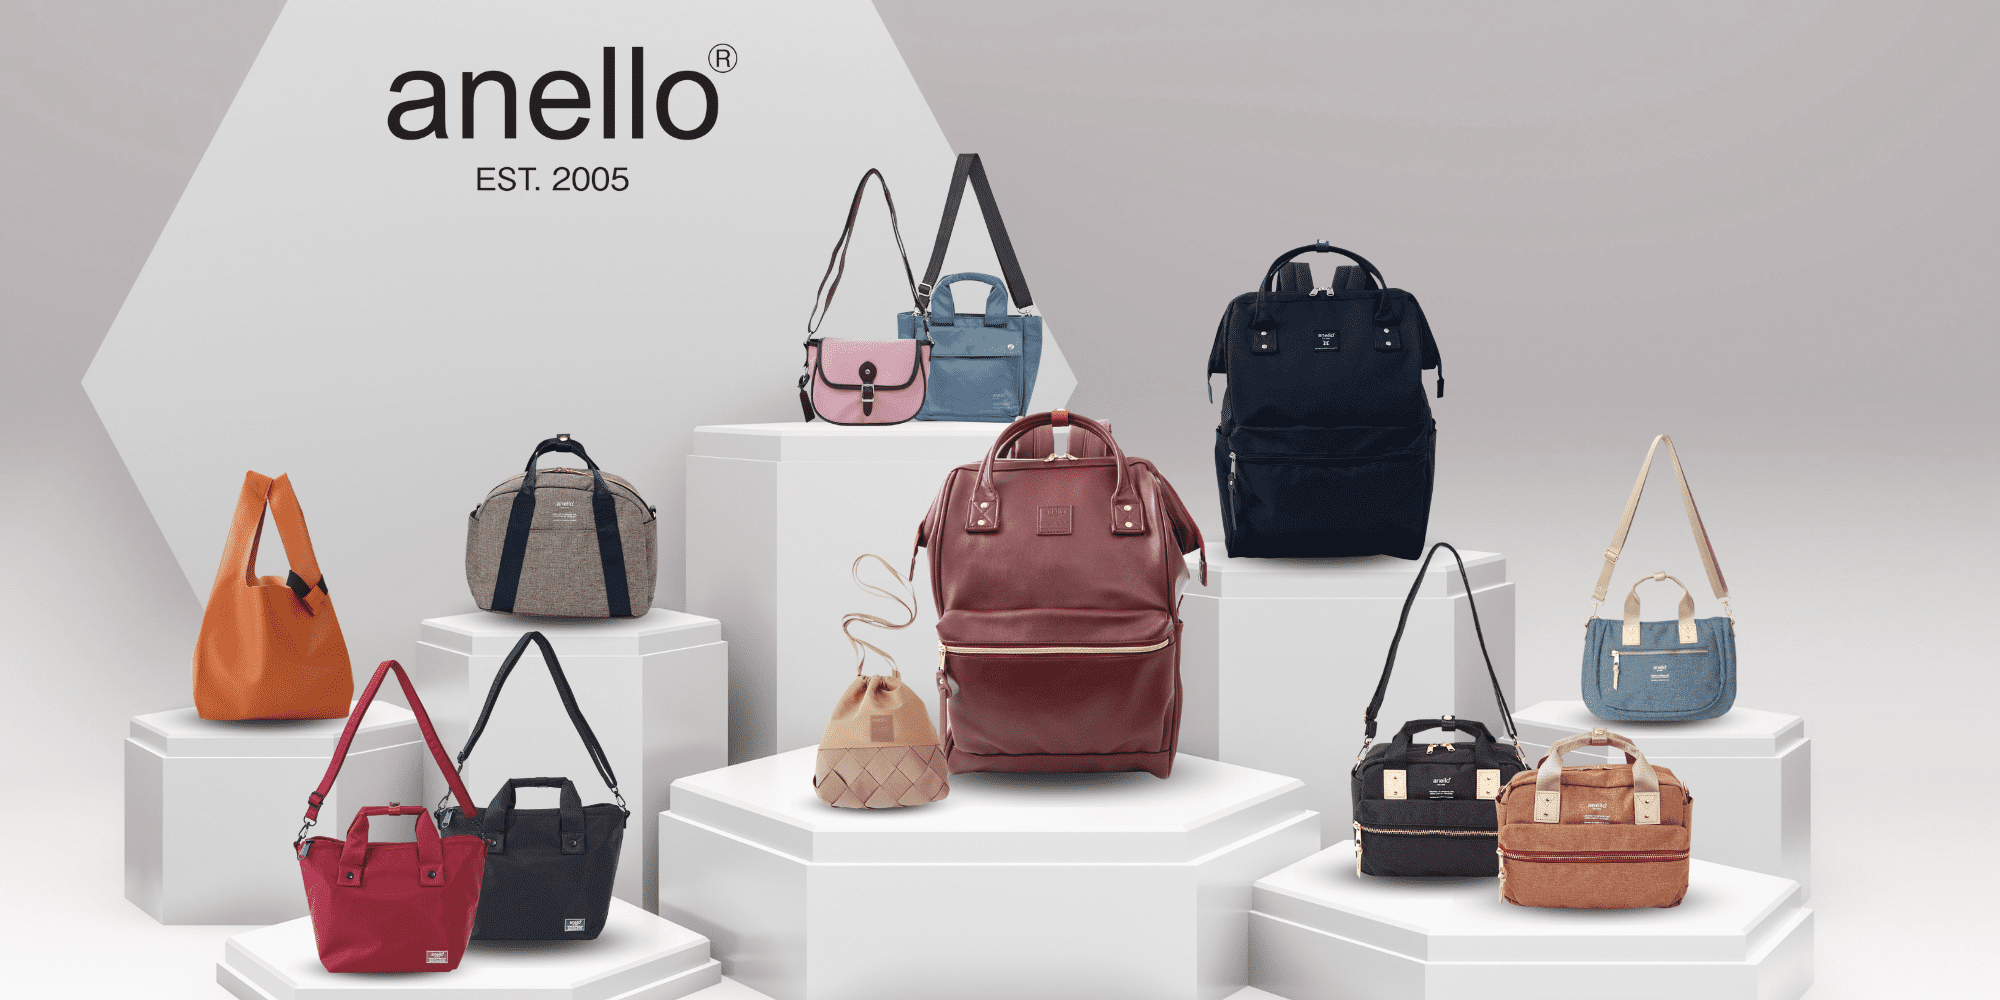 How to get Authentic Reasonable price Anello bag in Singapore and